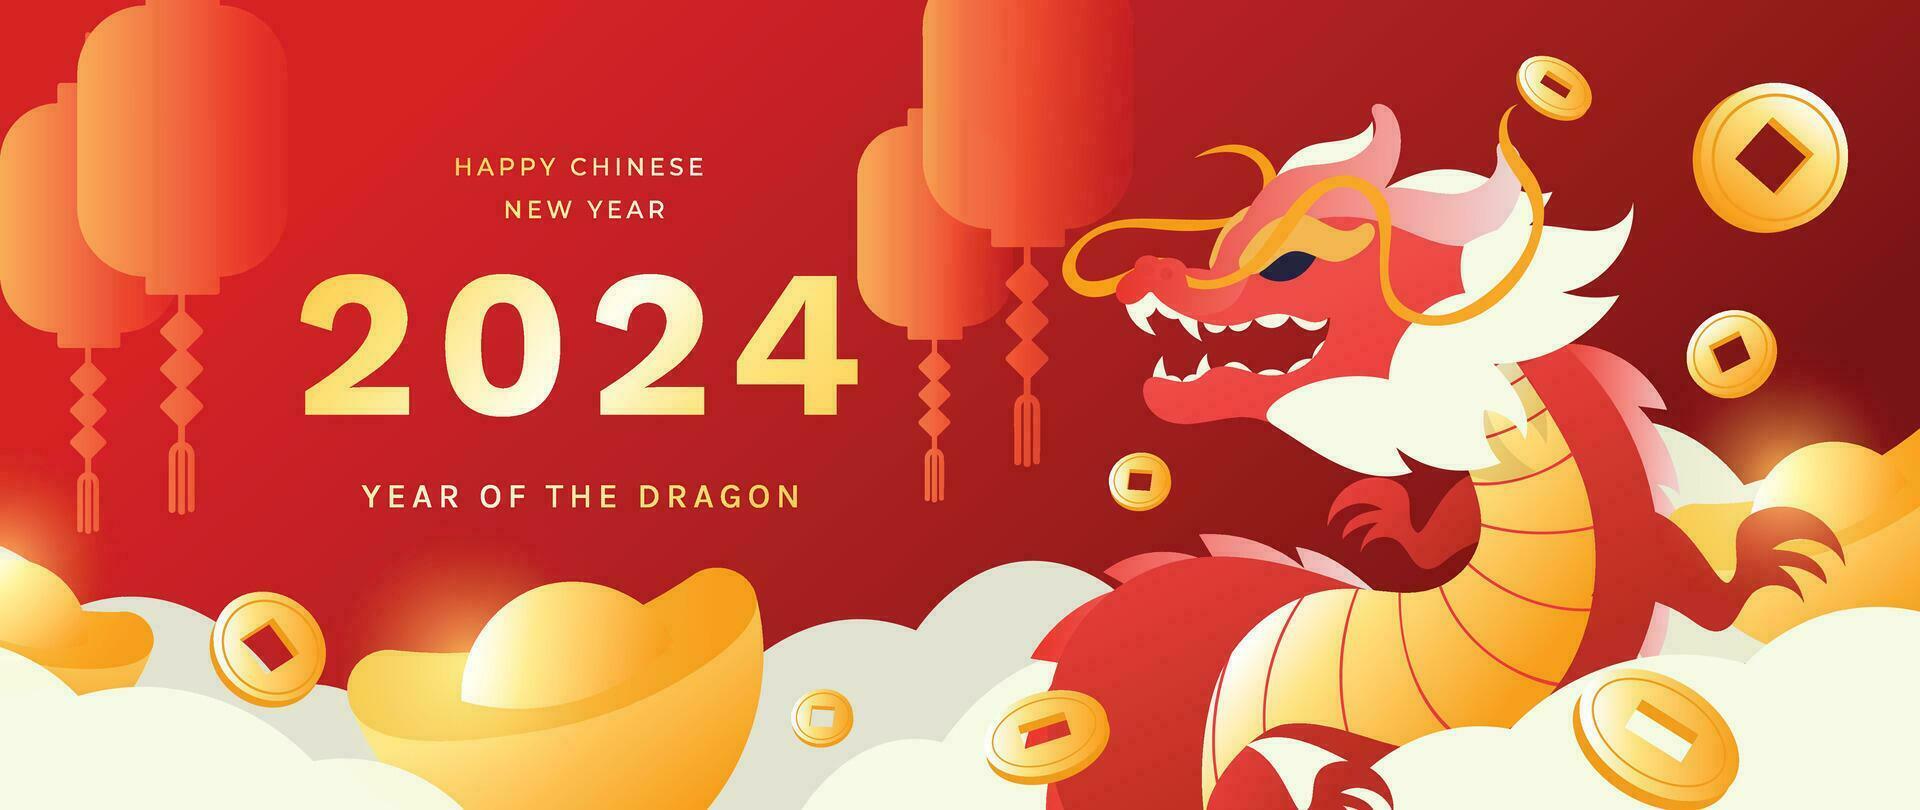 Happy Chinese new year background vector. Year of the dragon design wallpaper with dragon, coin, chinese lantern, cloud. Modern luxury oriental illustration for cover, banner, website, decor. vector